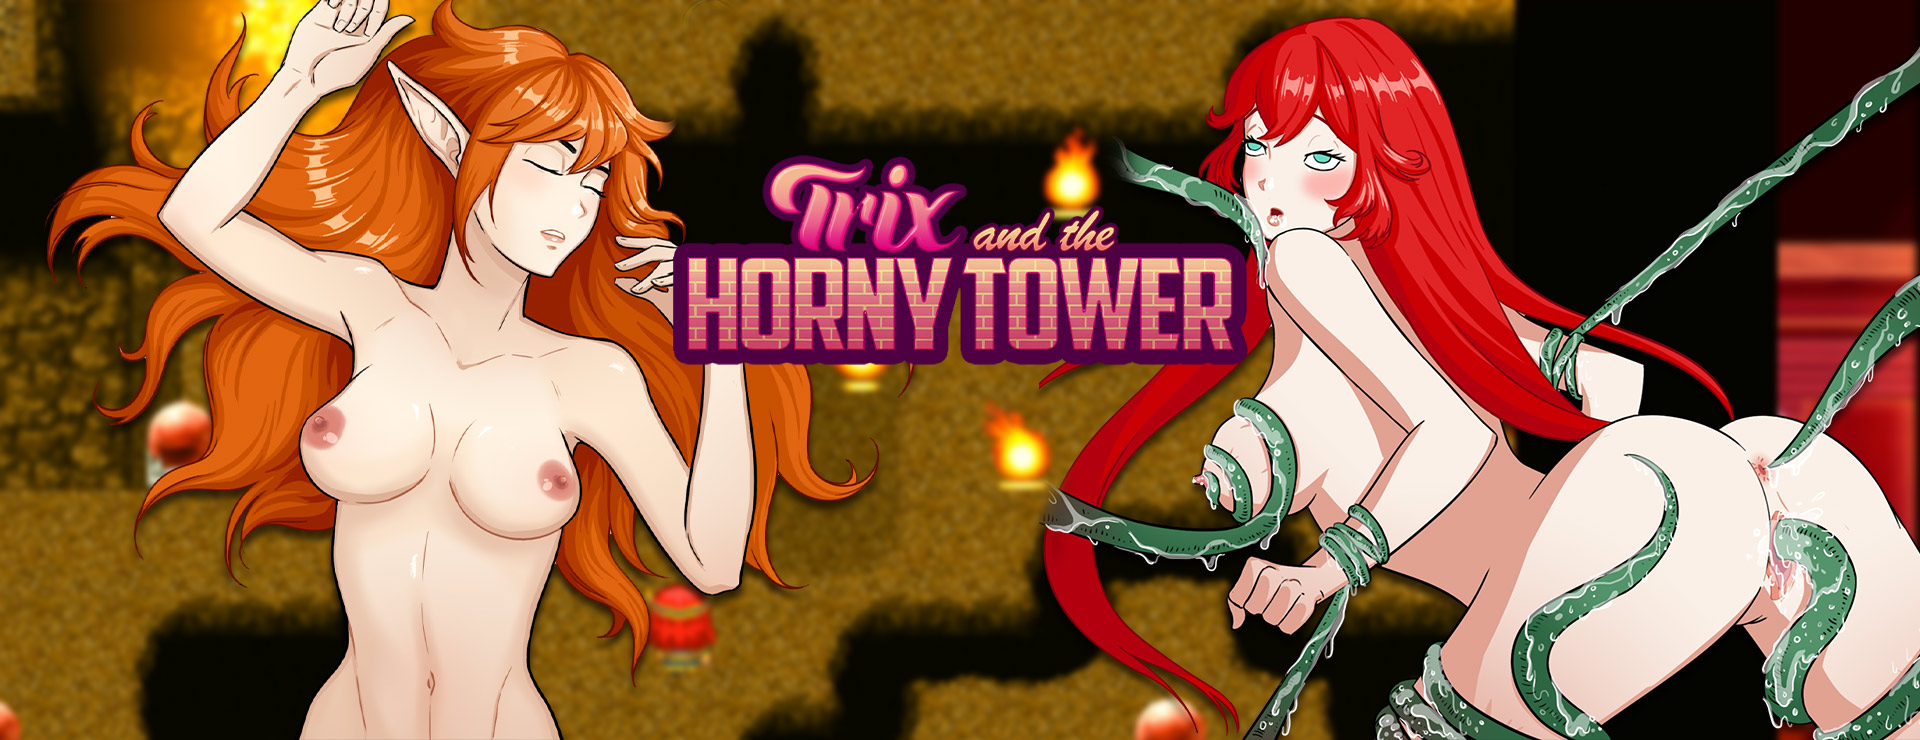 Trix and the Horny Tower - RPG Spiel